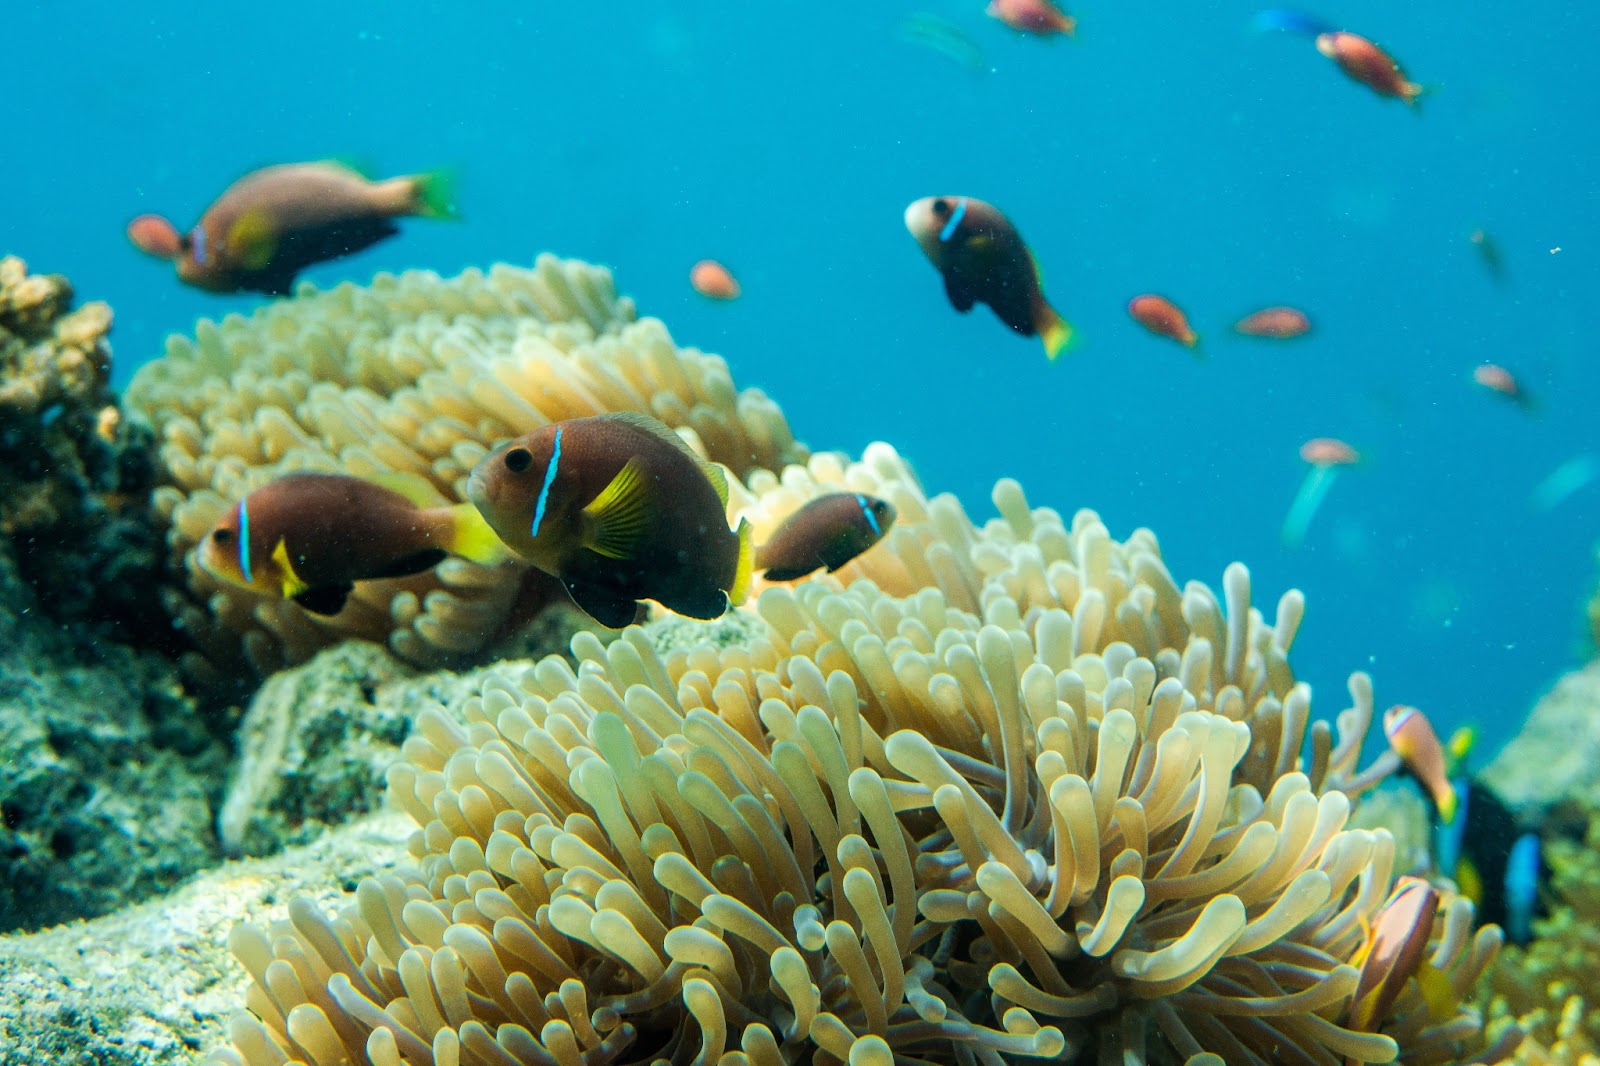 Crystal clear waters, vibrant coral reefs, and colorful marine life of the Maldives. 